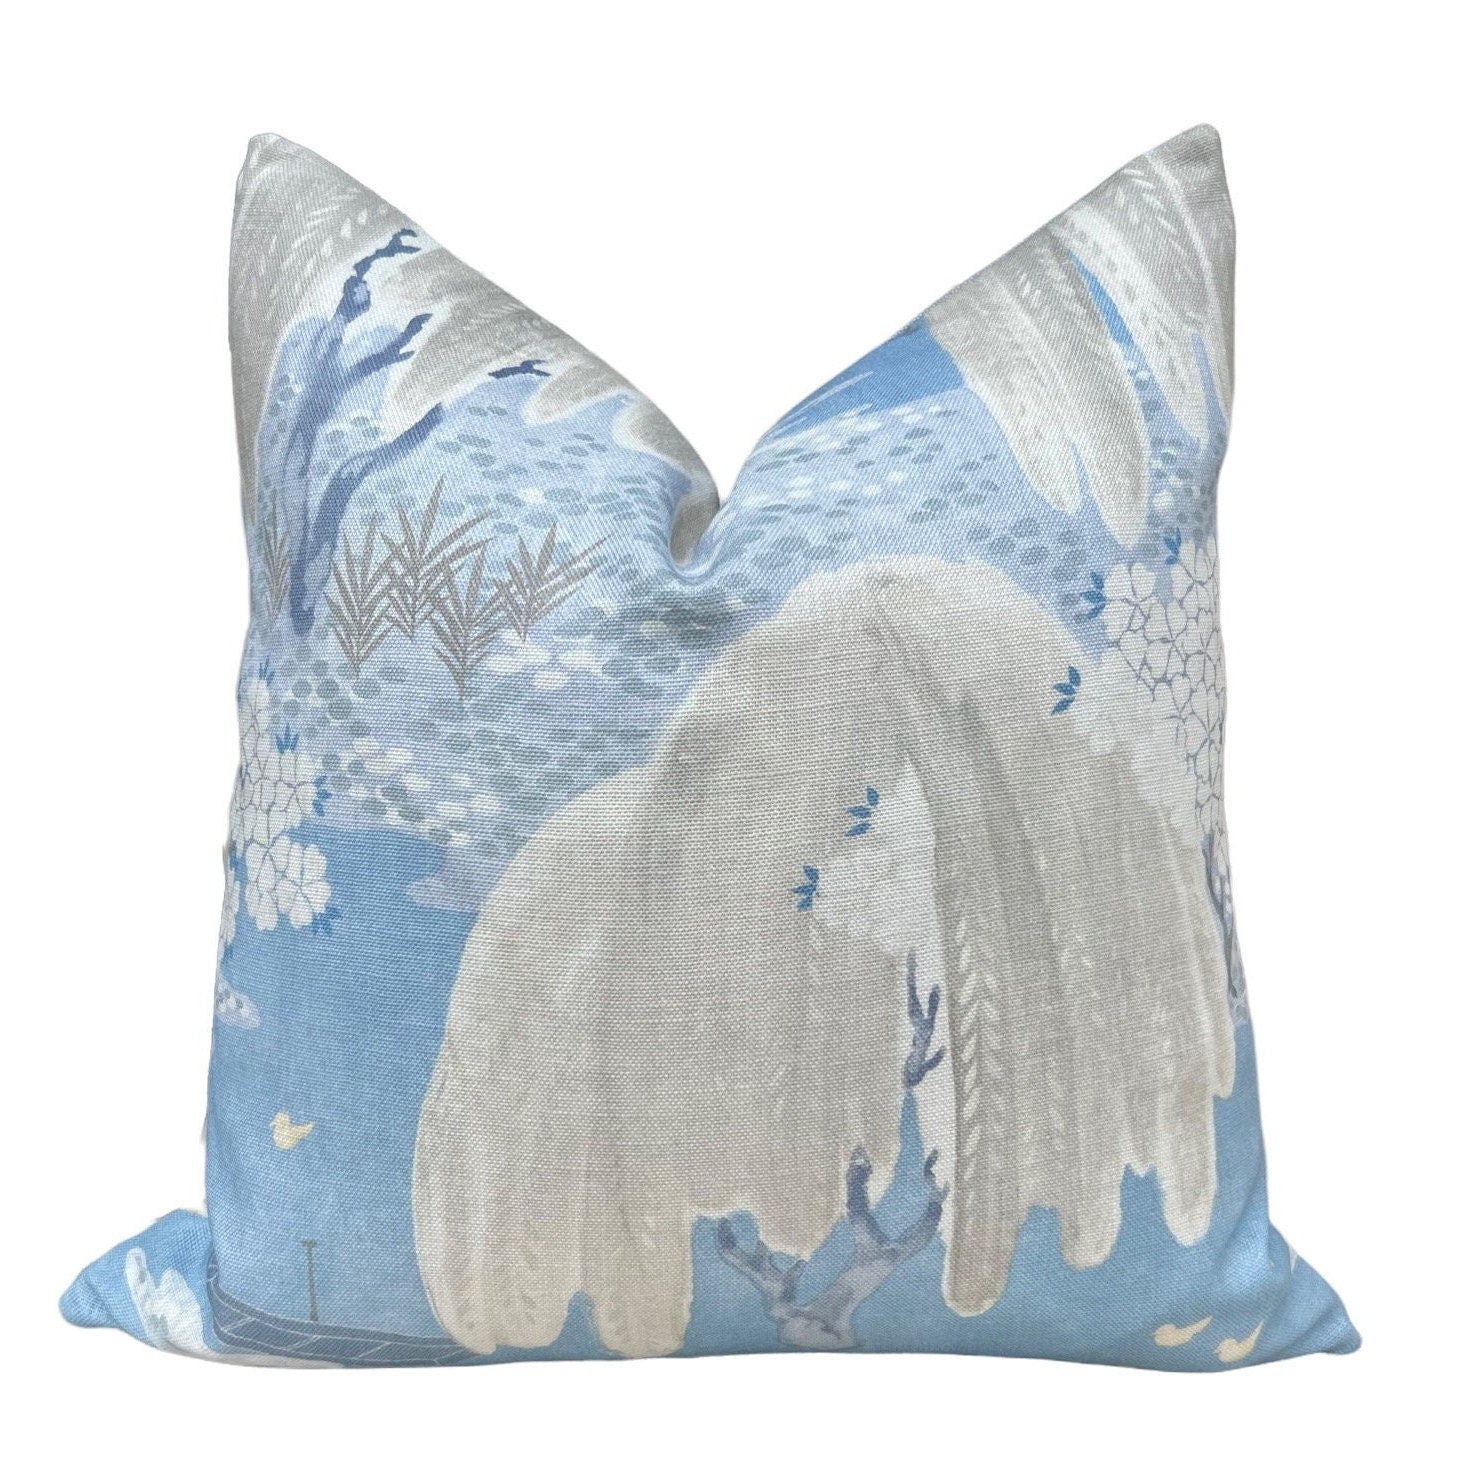 Thibaut Willow Tree Pillow in Soft Blue. Designer Pillows, High End Pillows, Accent Pillows in Gray and Blue, Lumbar Floral Pillow